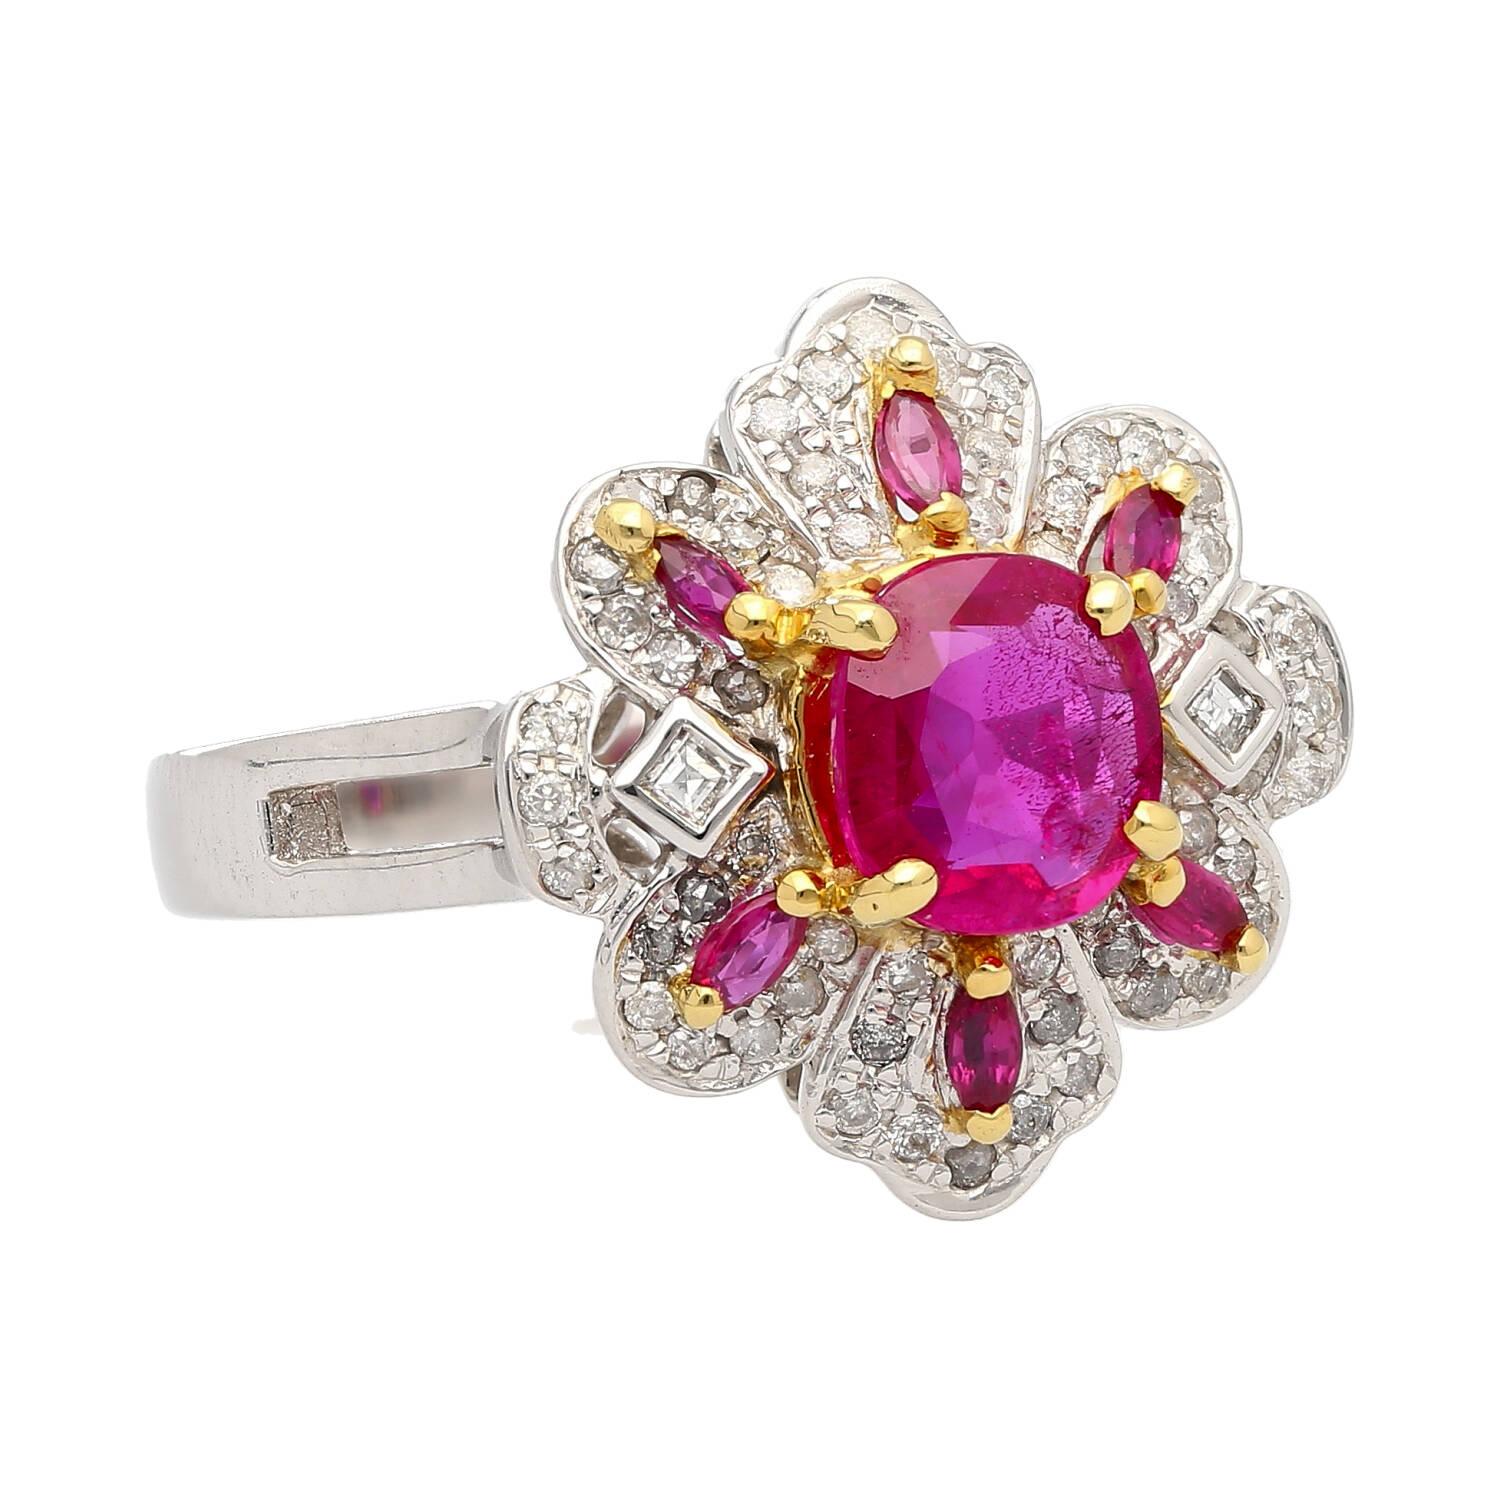 0.91 carat round cut pinkish red color natural ruby in 14k white and yellow gold floral motif ring. The ring features a split open shank that contrasts well on the finger while worn. The center stone is full of life and displays a lustrous rich